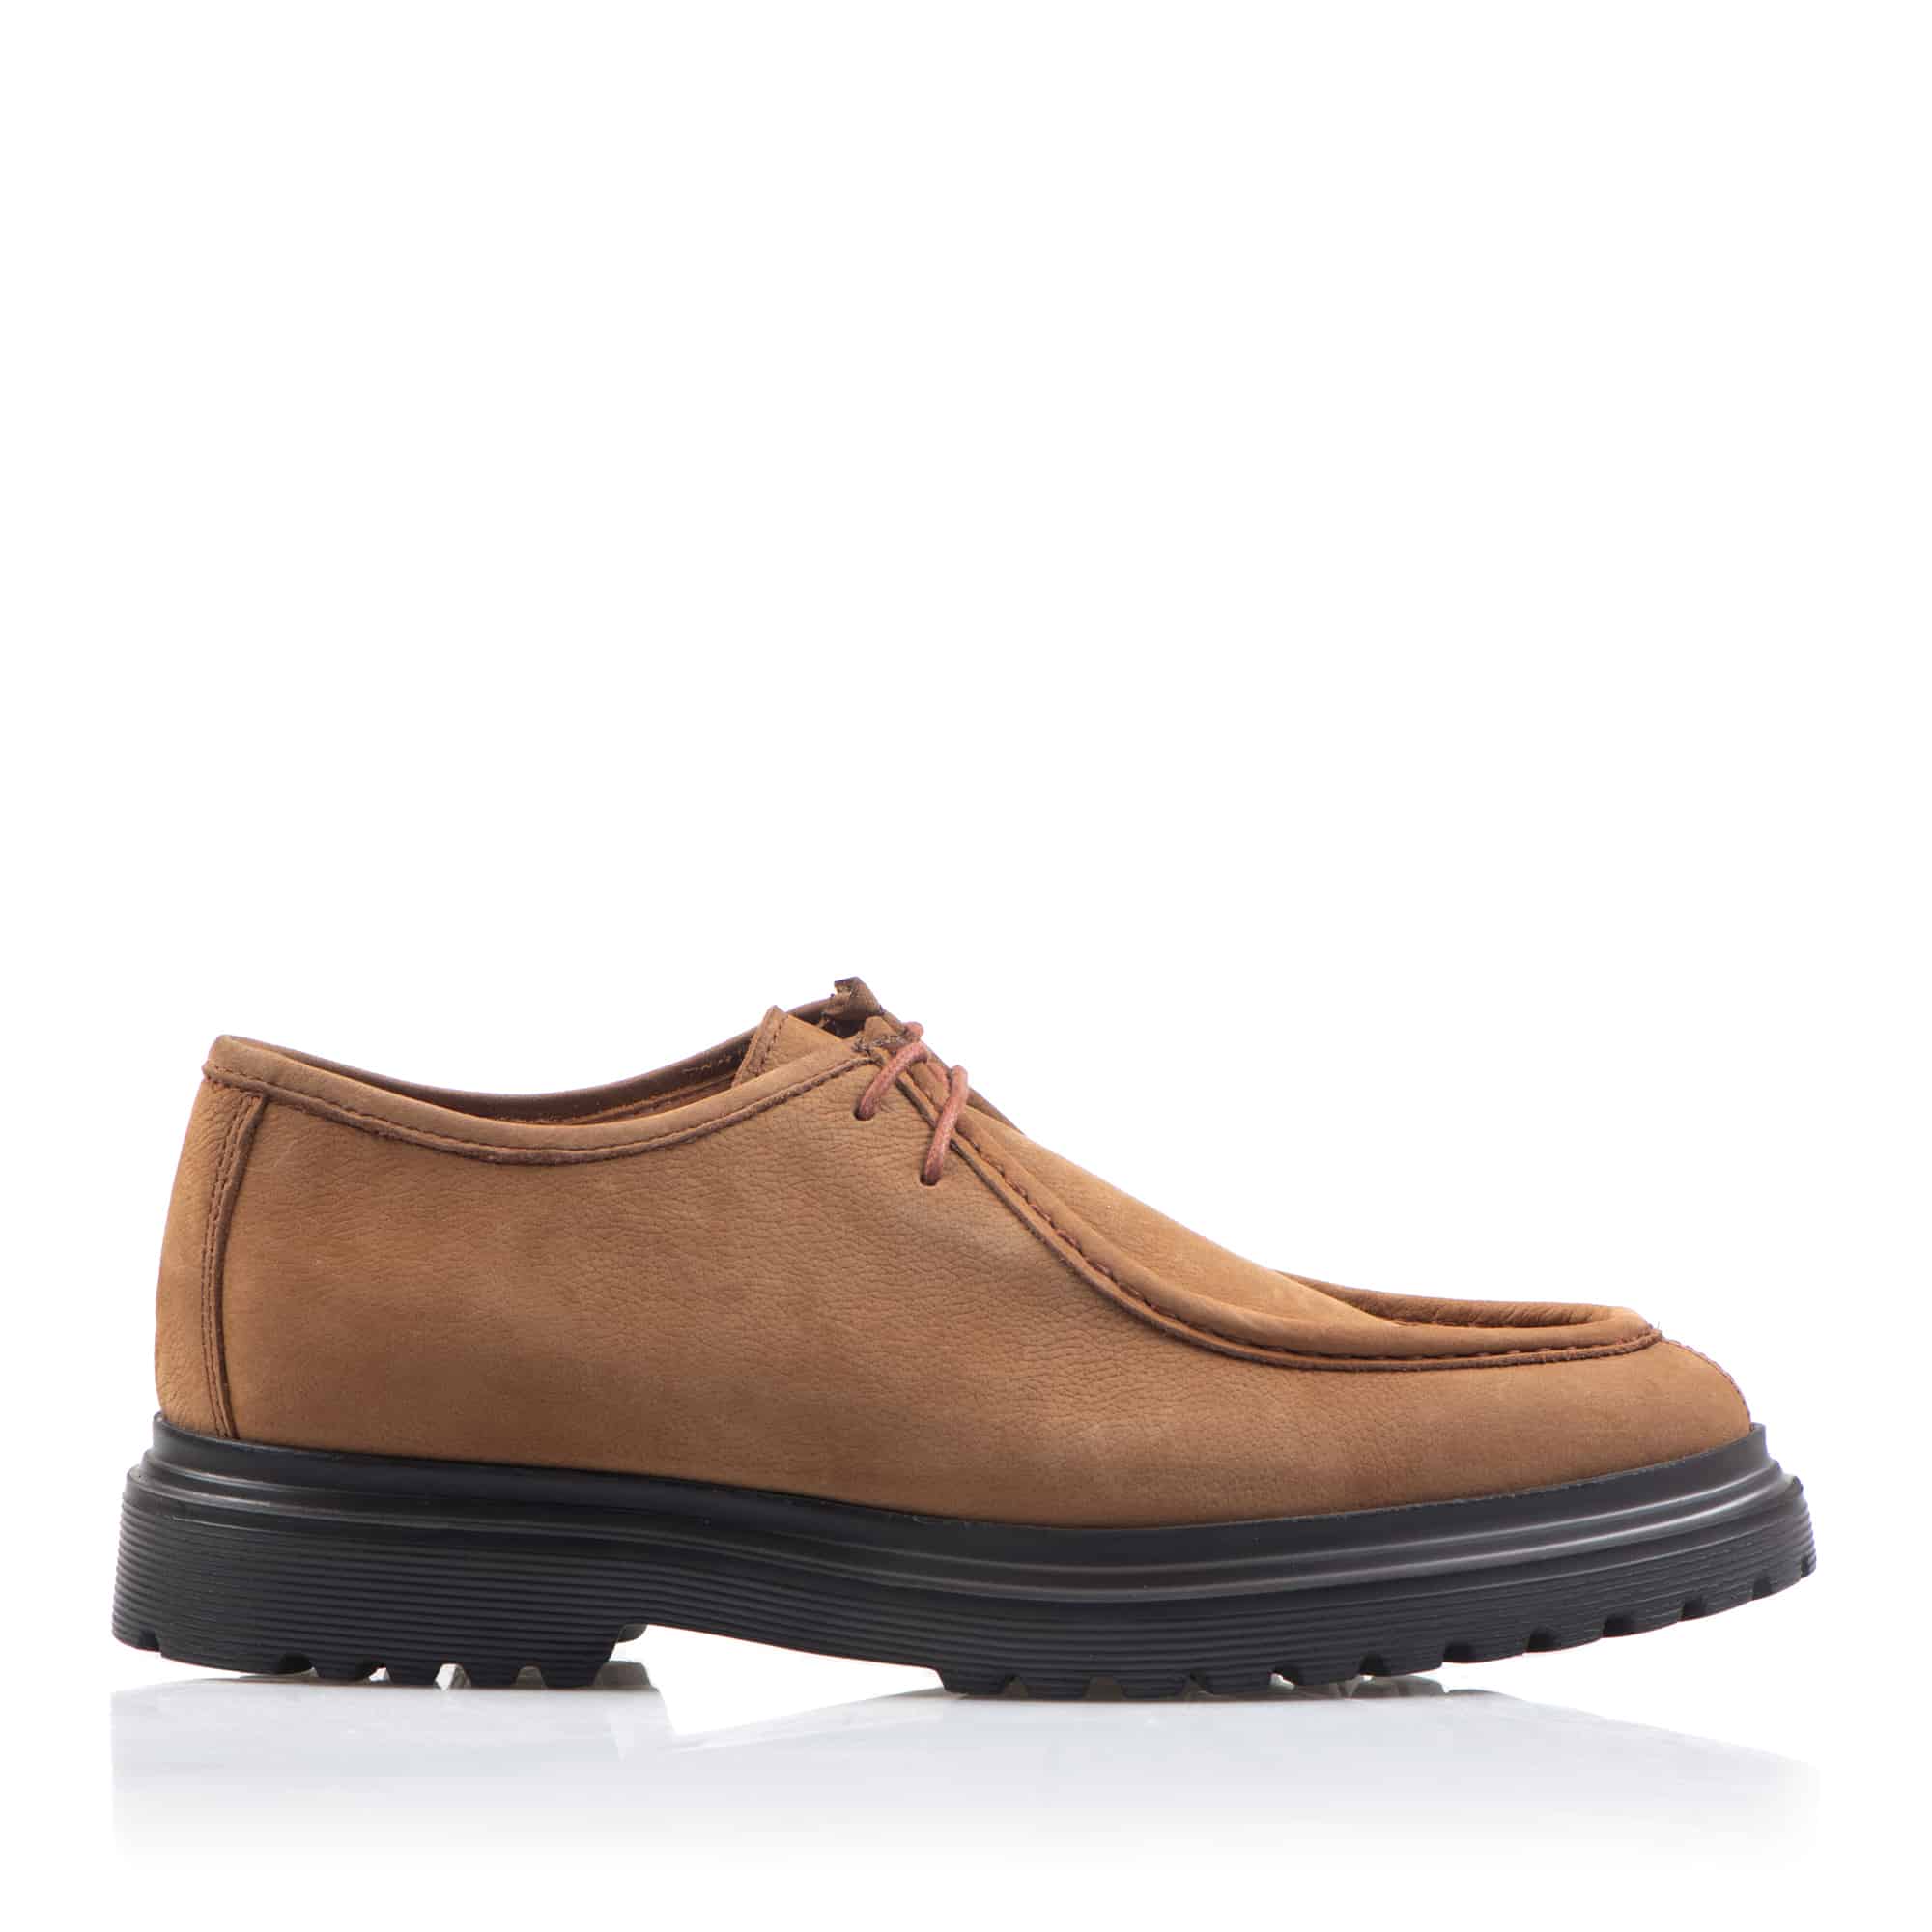 SUEDE LEATHER DERBY SHOES LXII